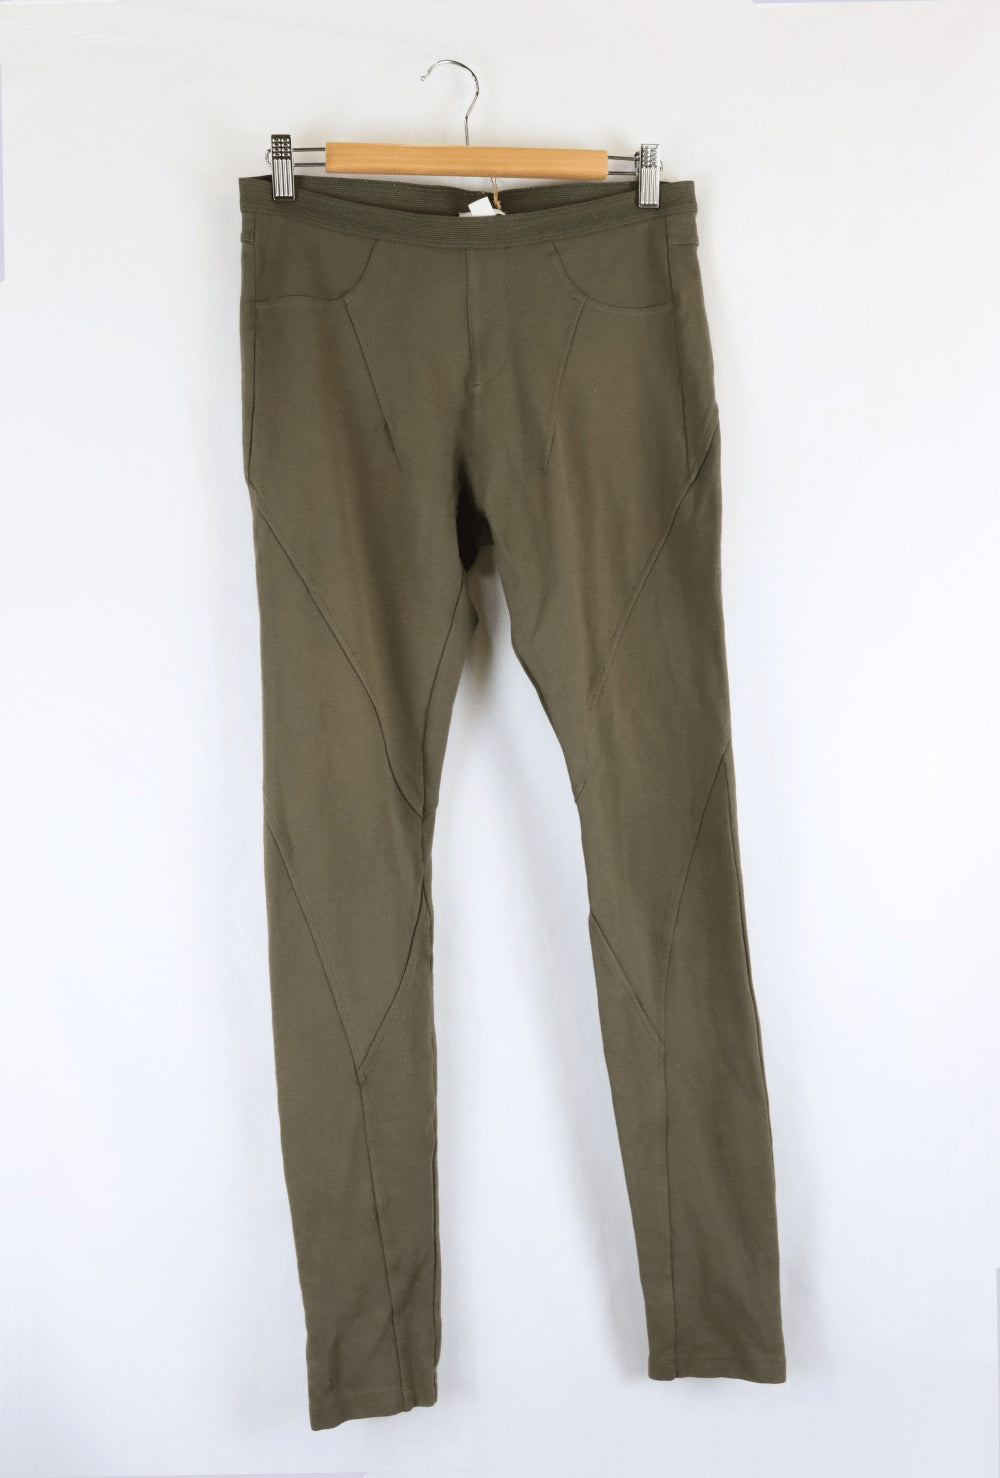 Witchery Green Pants 12